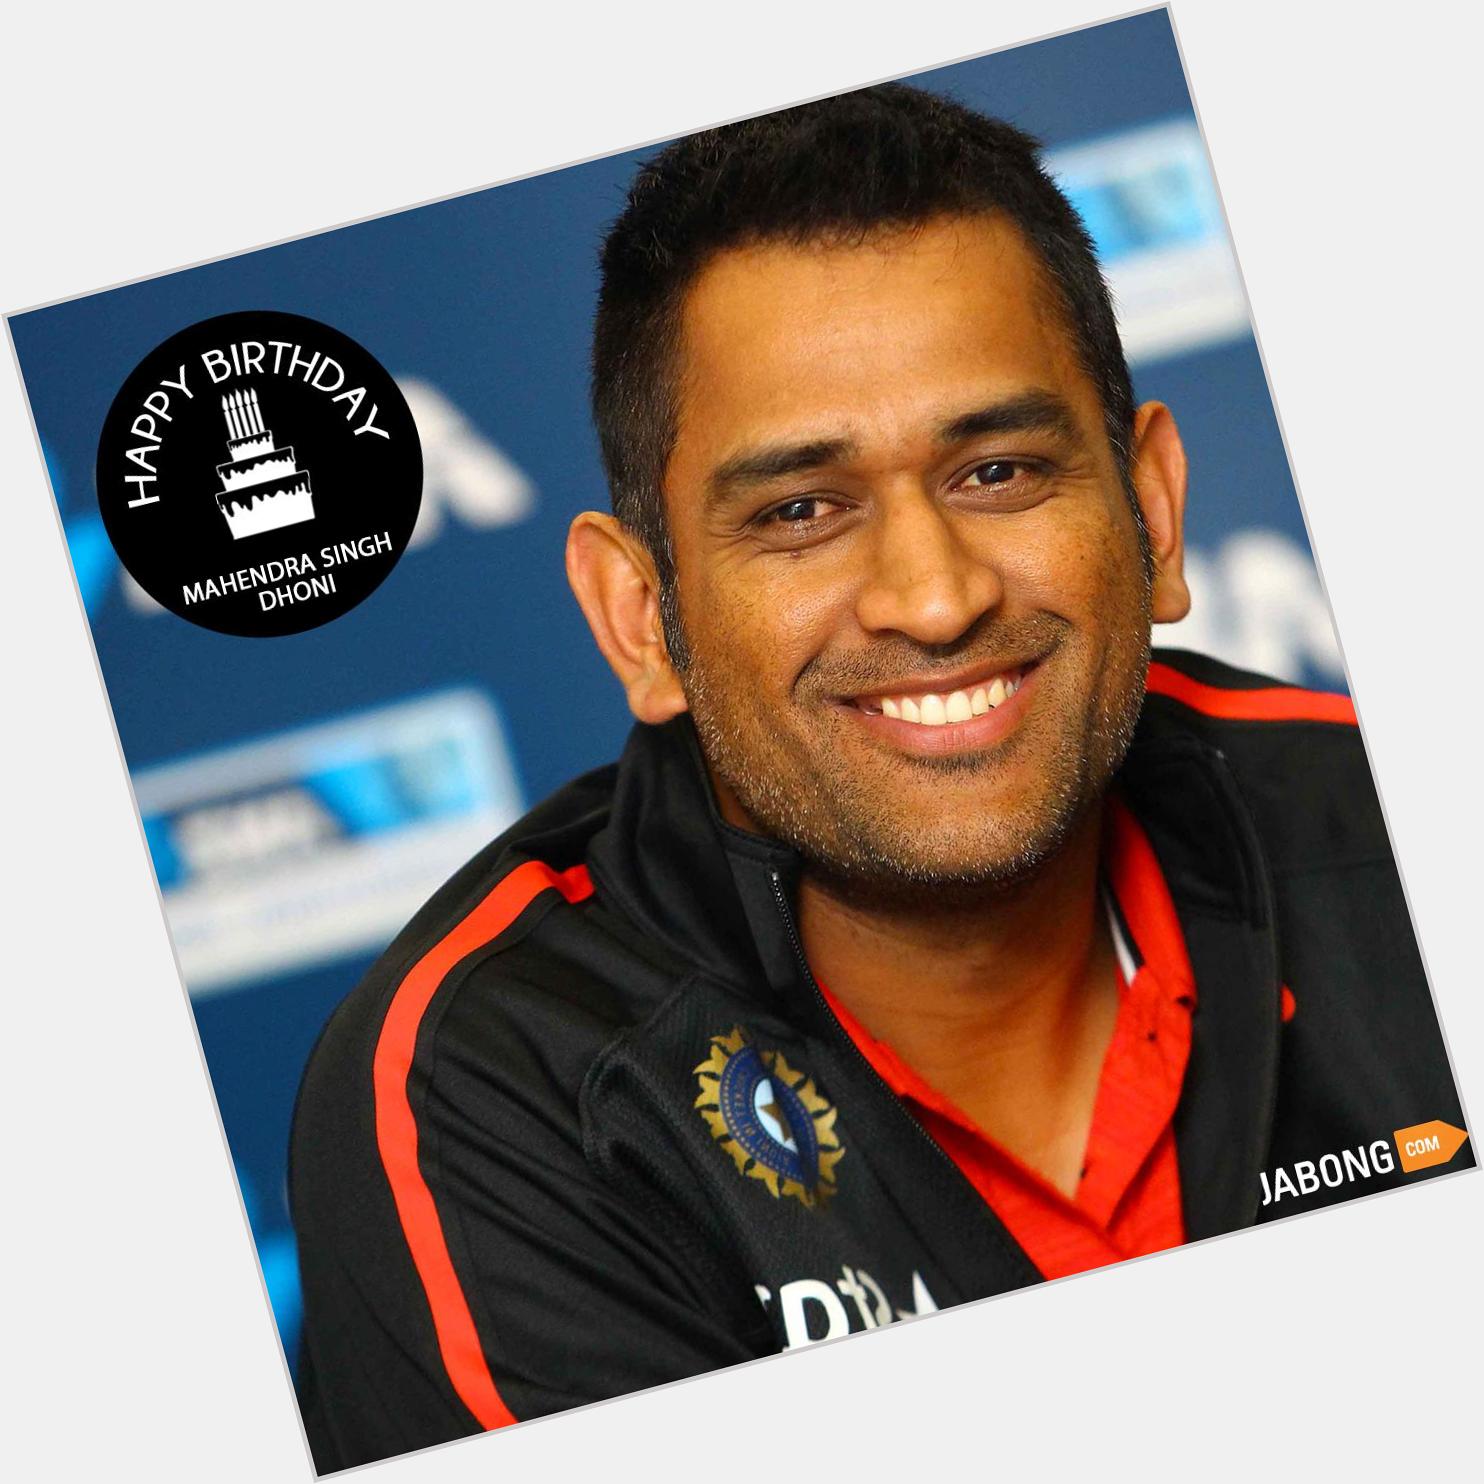 Here\s wishing a very happy birthday to the pride of Indian cricket, Mahendra Singh Dhoni! 